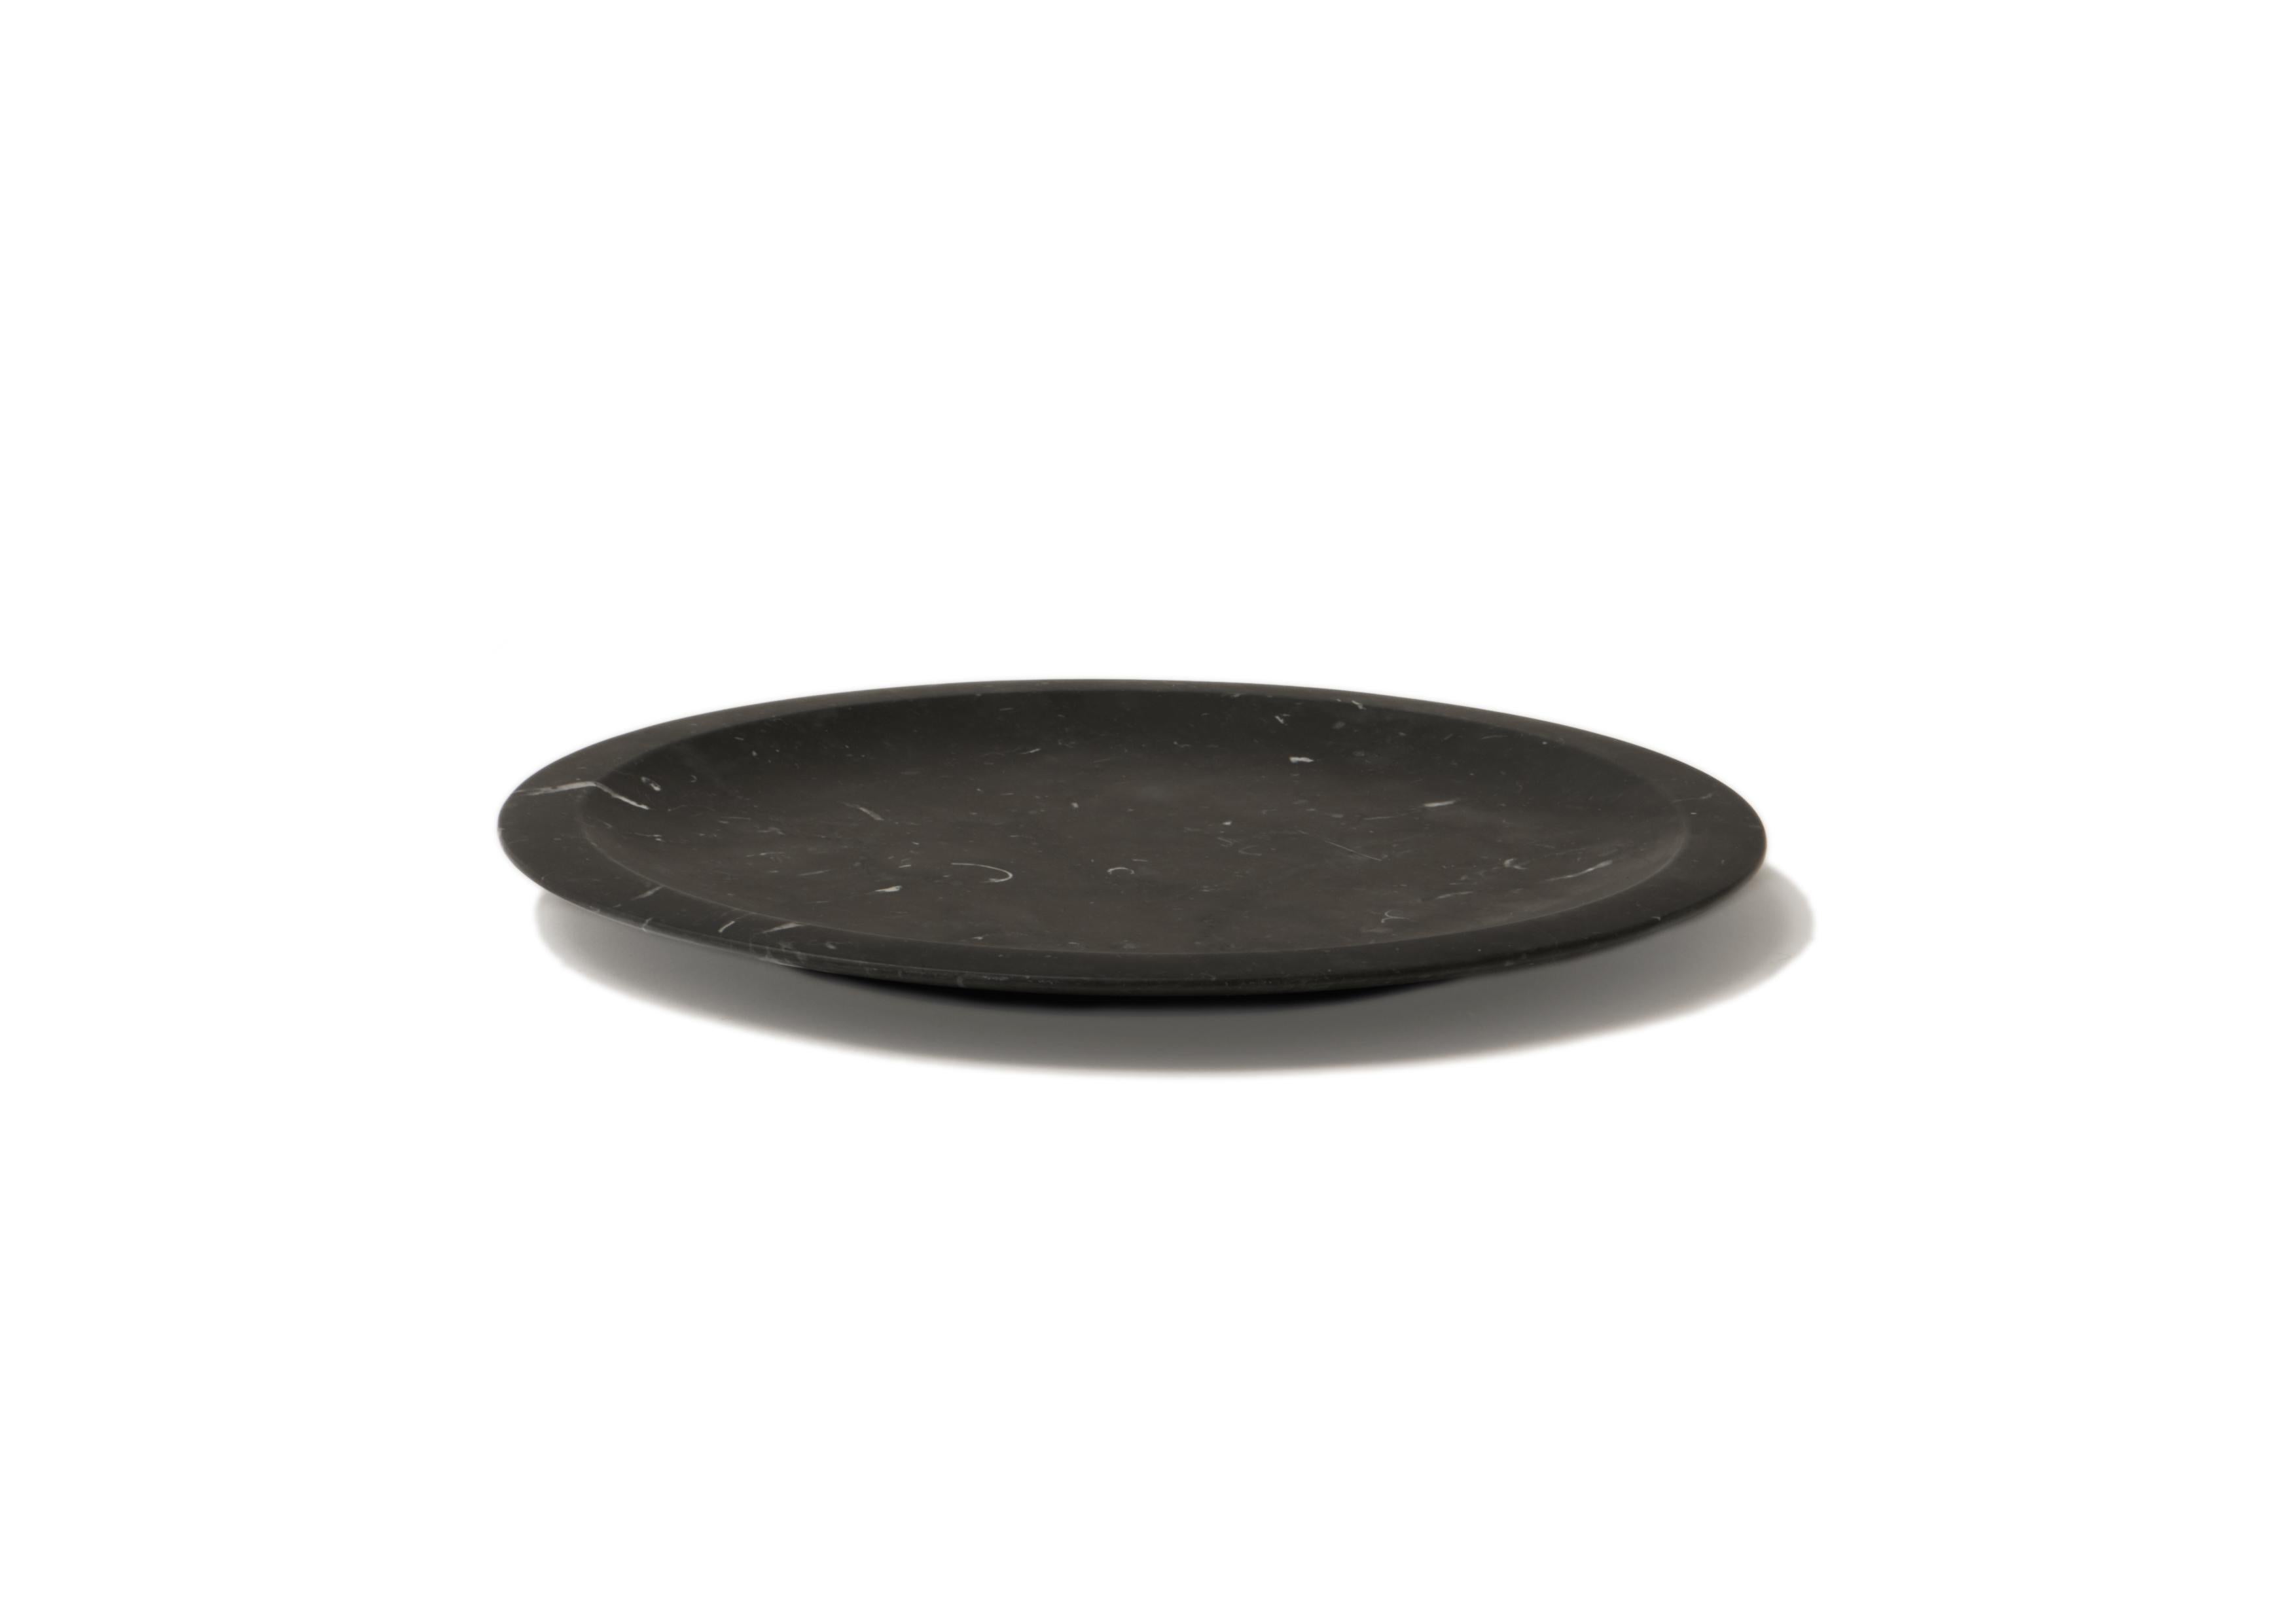 Piatto Piano #1 - dining plate - Black by Ivan Colominas
Materia e Tavola Collection
Dimensions: 25 x 2 cm
Materials: Nero Marquinia
Also Available: Bianco Michelangelo / Bianco Carrara.

The collection is a tribute to one of Italy’s great